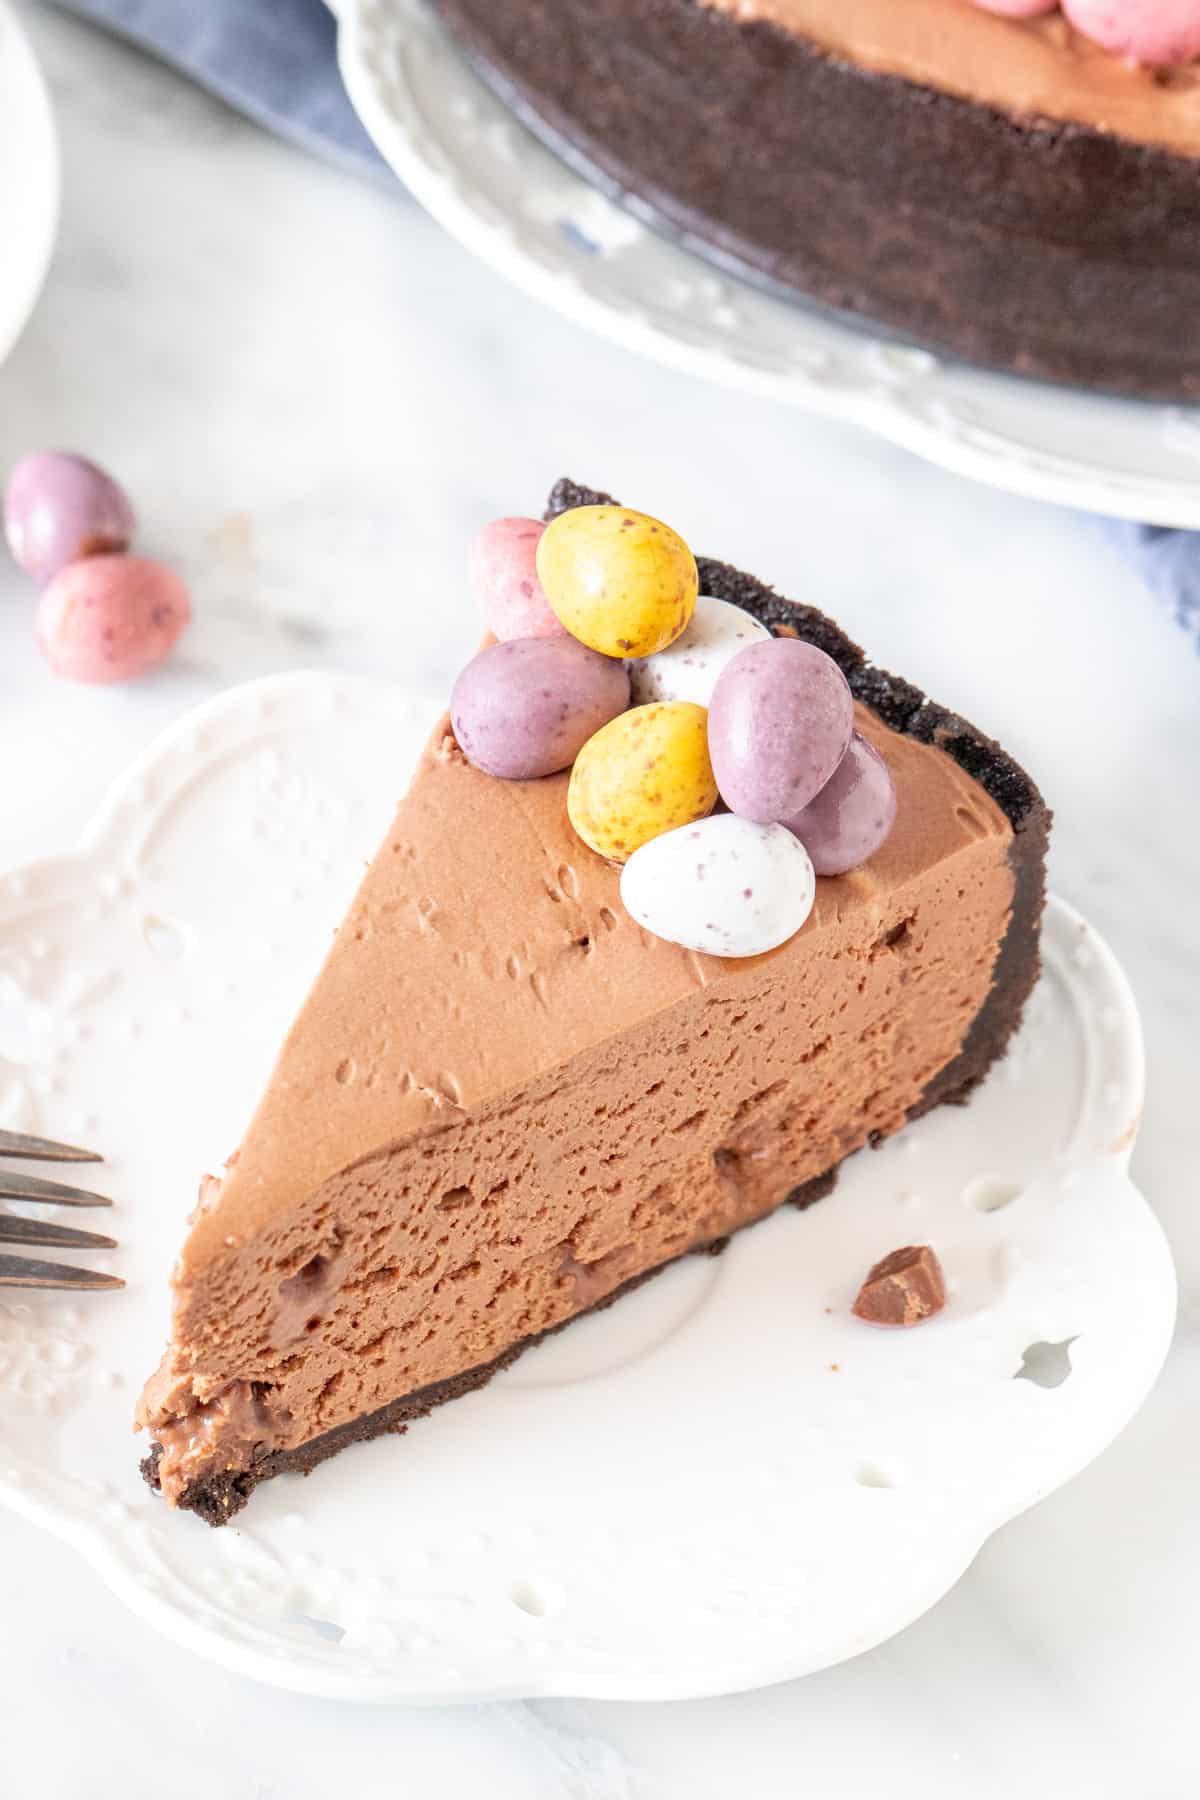 Slice of chocolate cheesecake with mini eggs on top